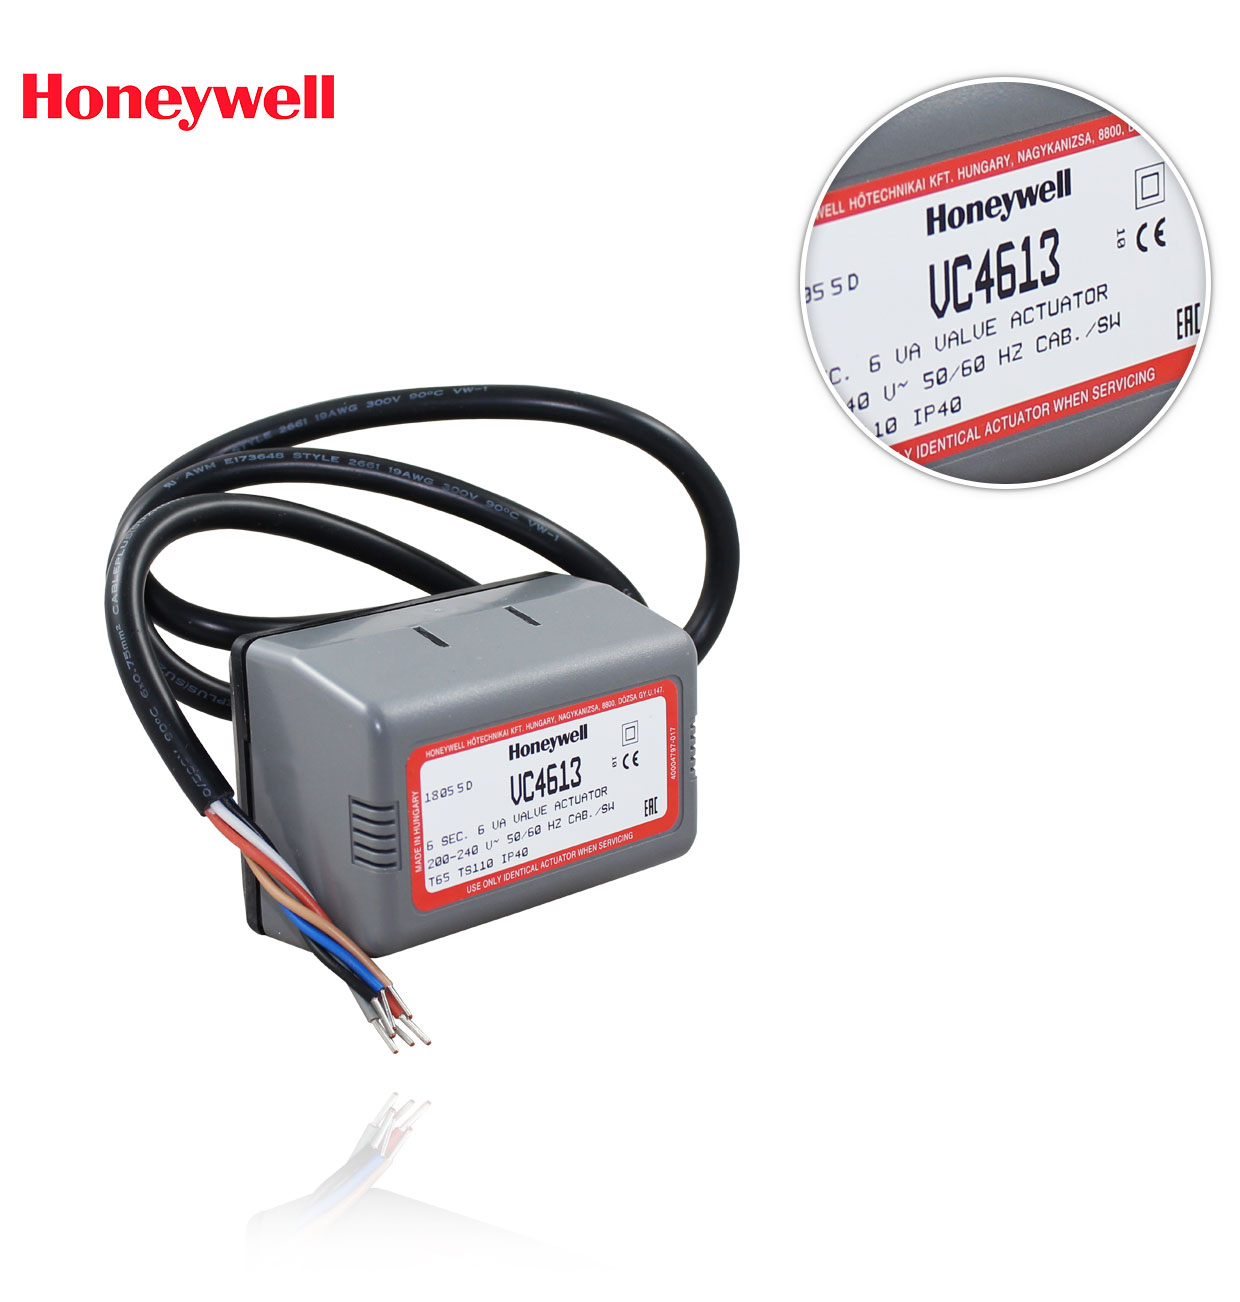 VC4613ZZ00  VC VALVE ACTUATOR-MOTOR, 230V, 2-WIRE+ COMMON, AUXILIARY CONTACT HONEYWELL